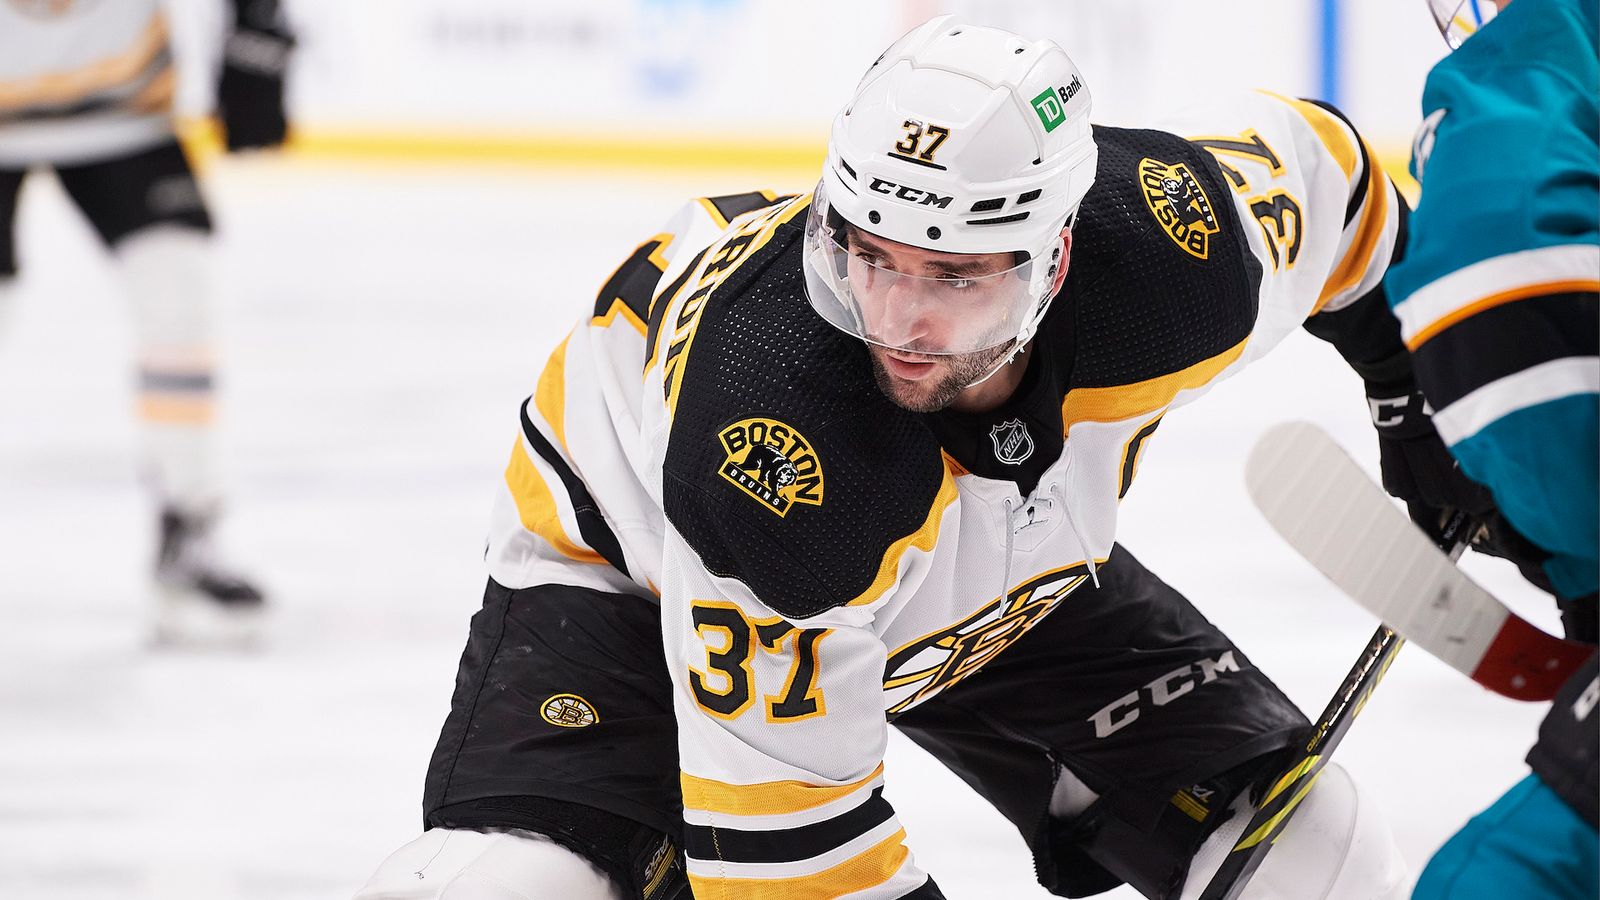 NHL: 5 reasons why Bruins are in a tier of their own this season